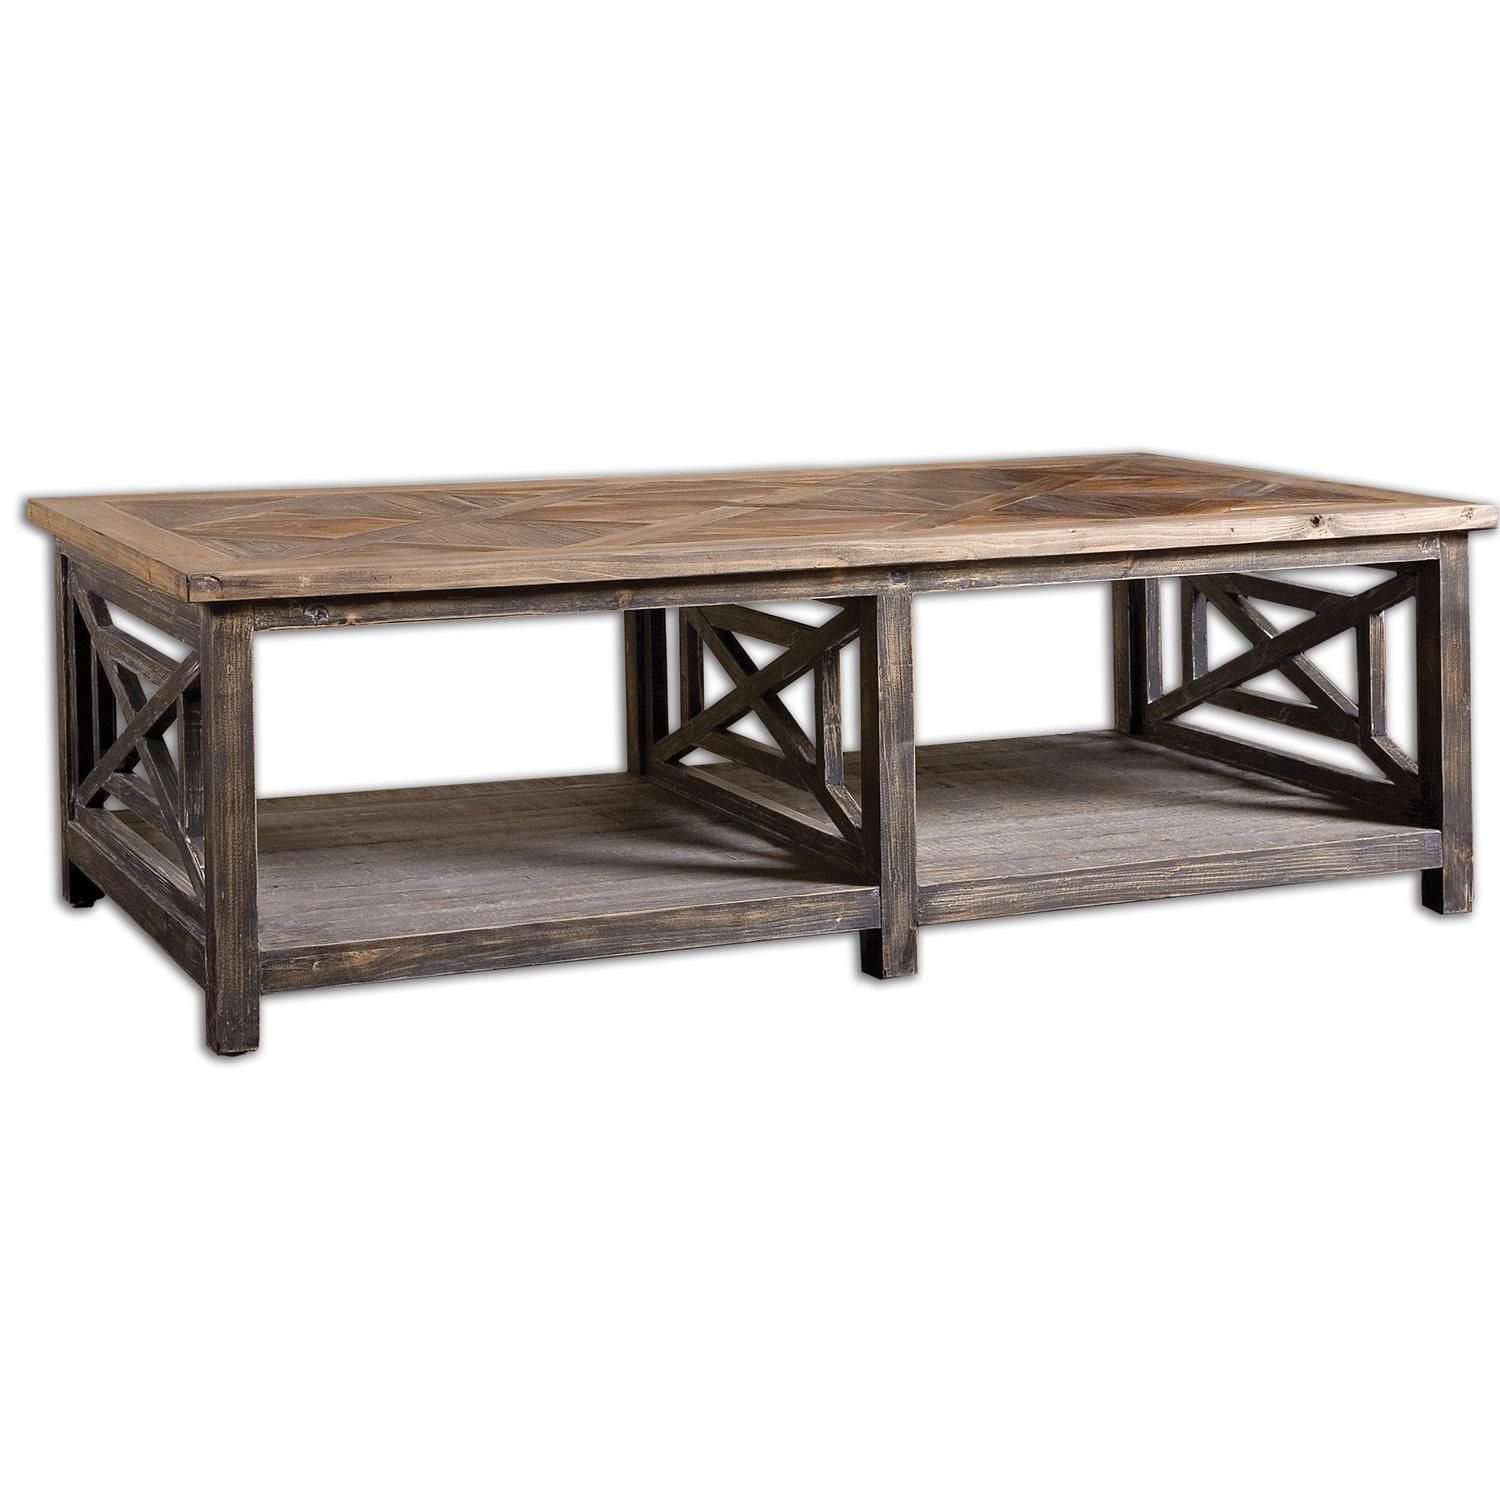 56" Carter Rustic Black & Gray Criss Cross Patterned Reclaimed Wood Pertaining To Wood And Dark Bronze Criss Cross Desks (View 10 of 15)